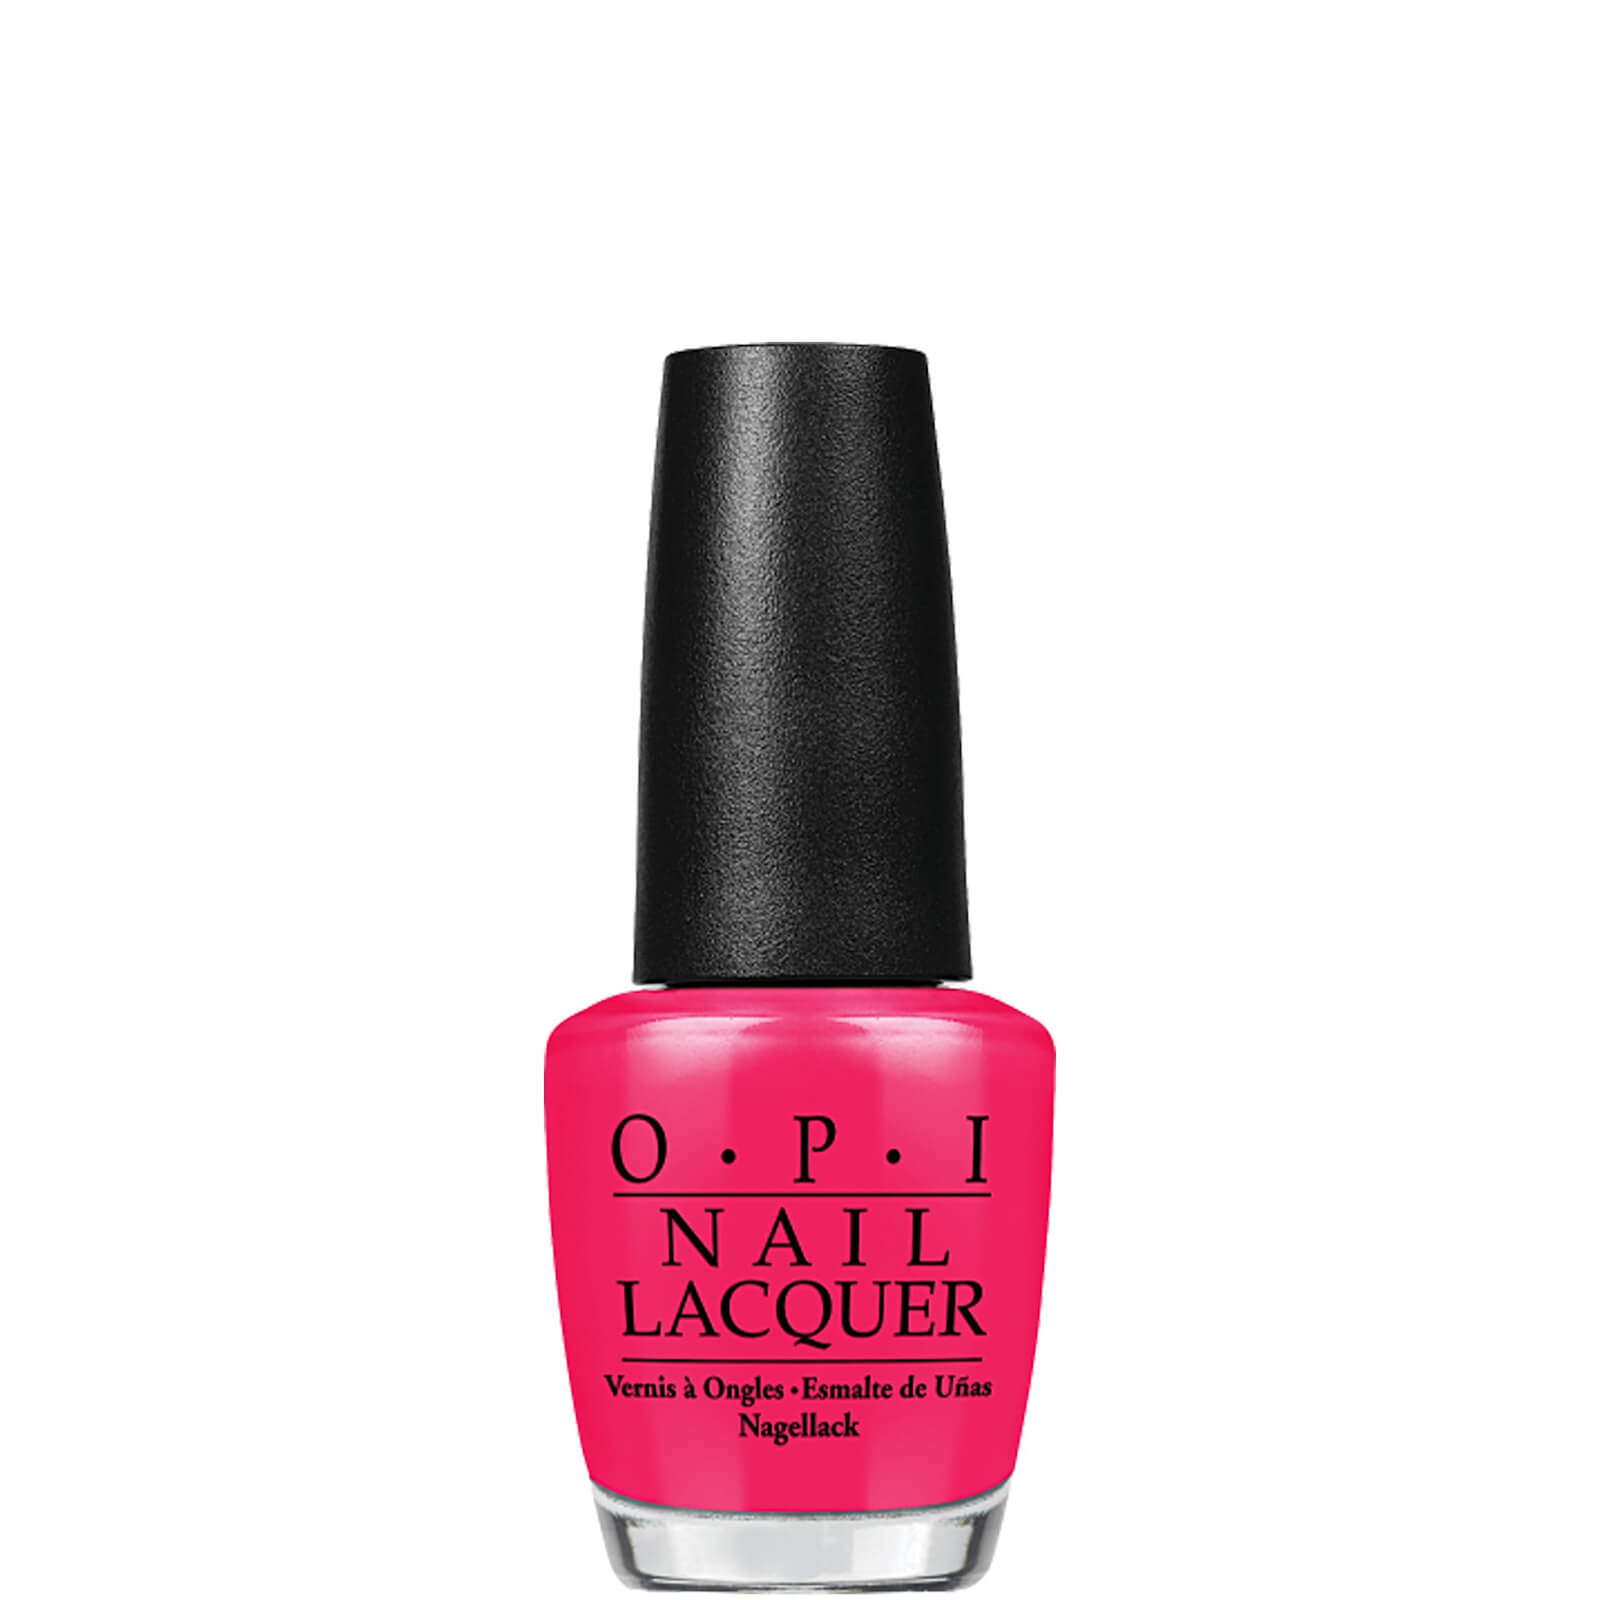 OPI Dutch Tulips - Nail Lacquer (15ml)